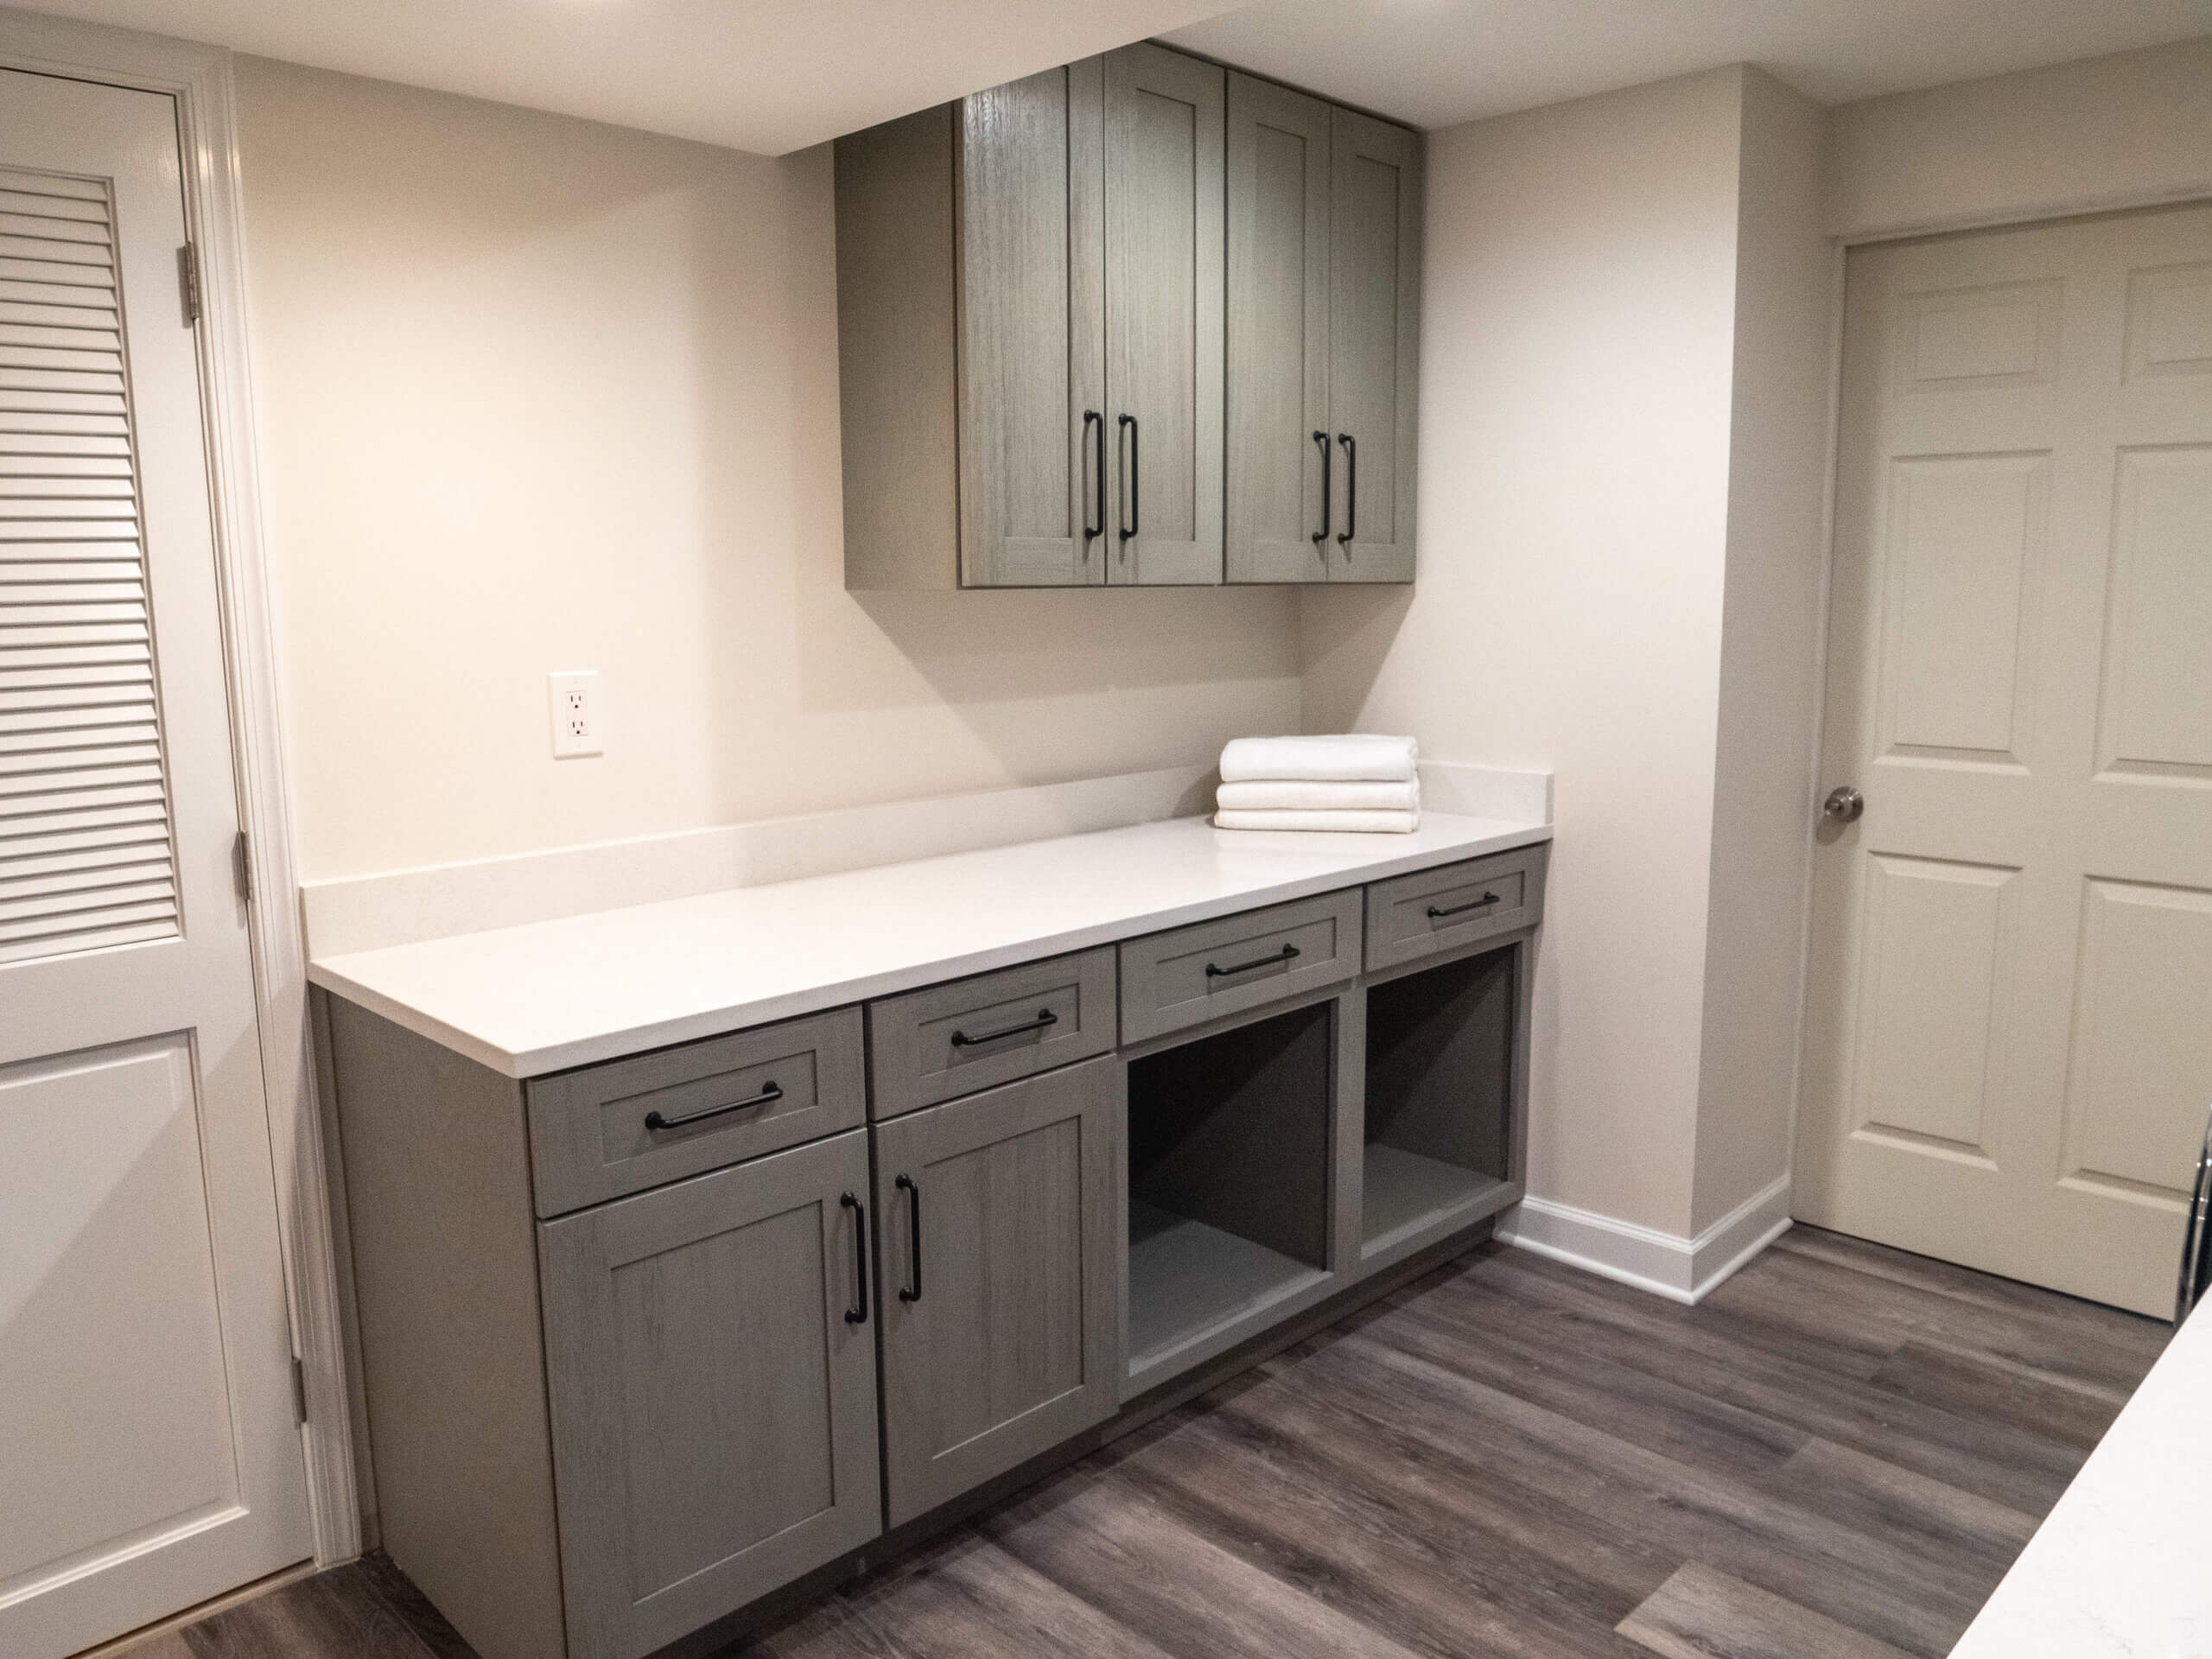 New countertops and cabinetry in completed laundry room renovation | Gaithersburg MD